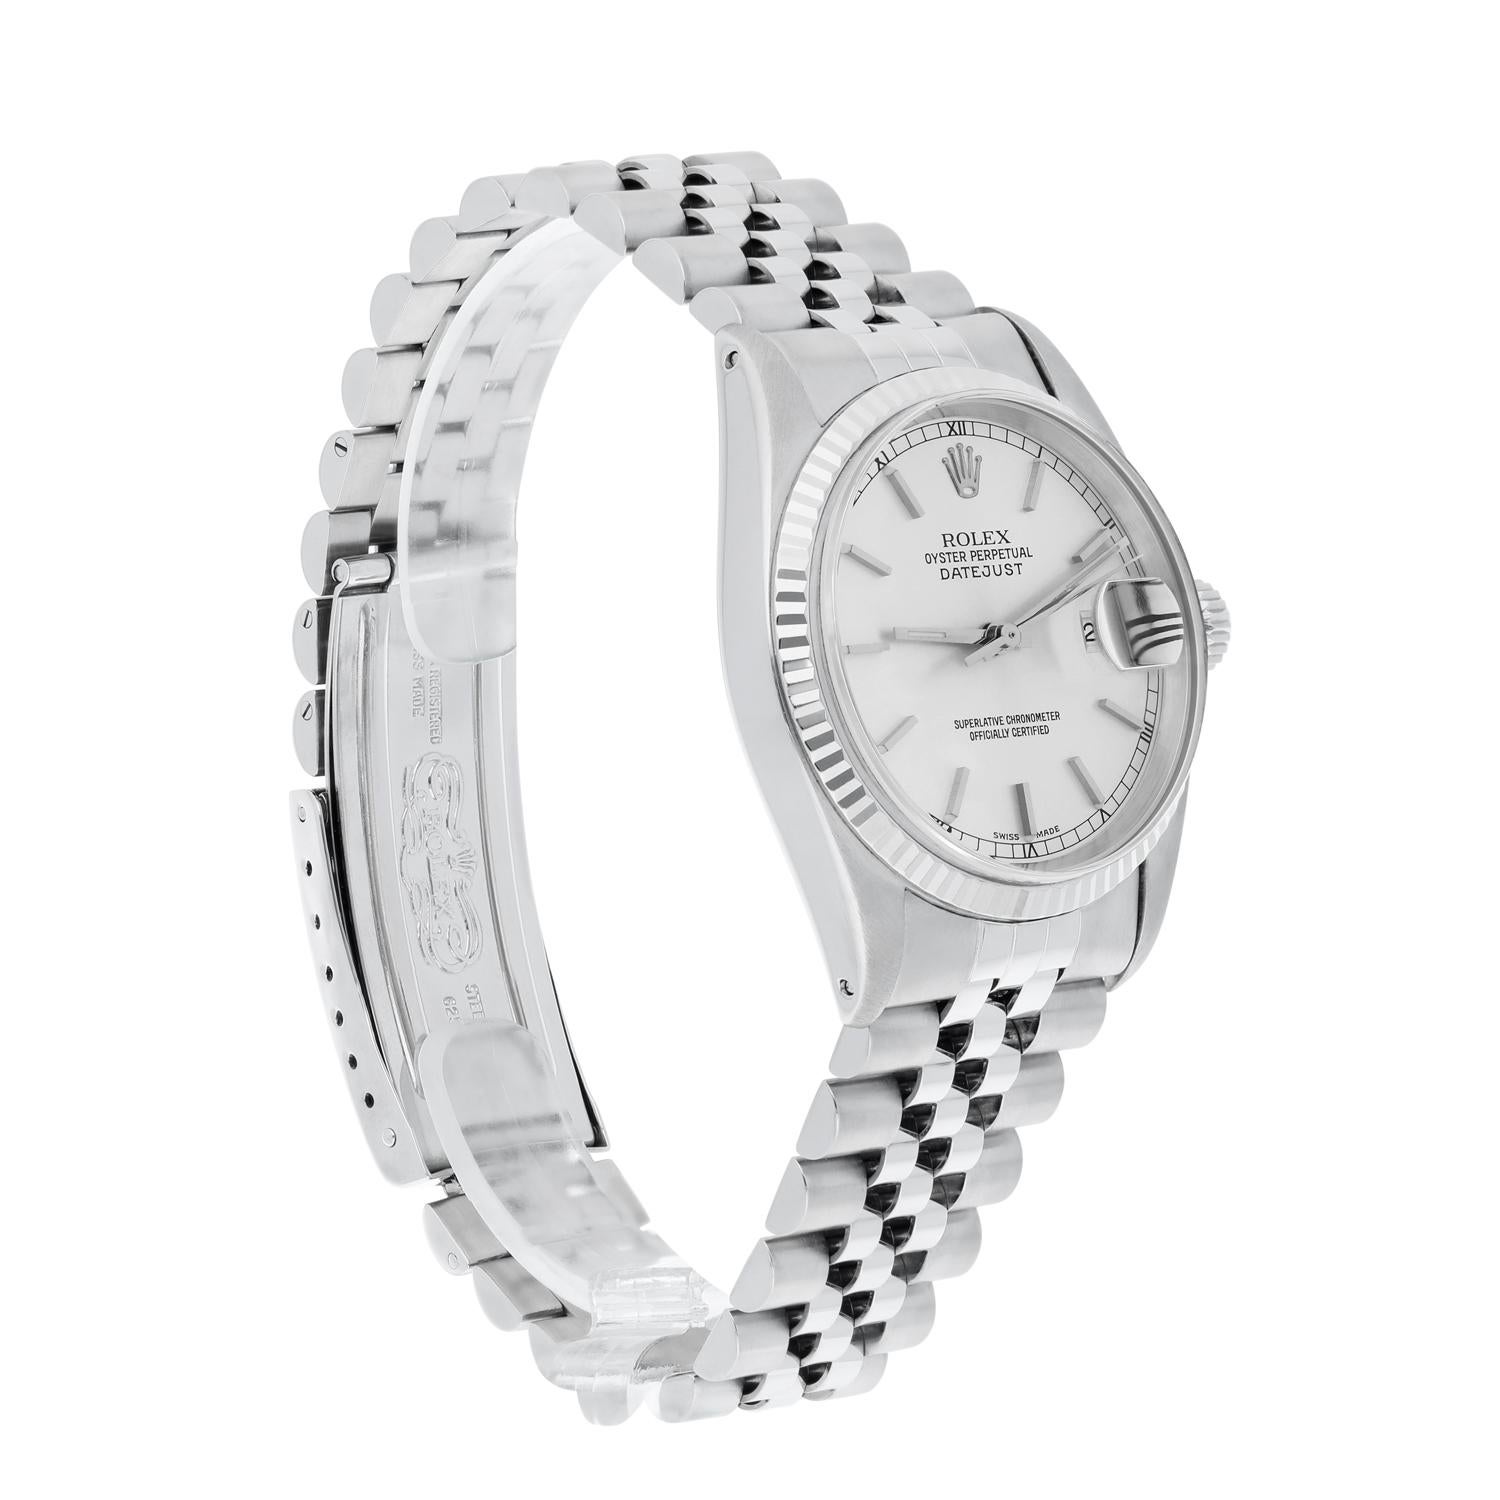 Rolex Datejust 36mm Stainless Steel 16014 Silver Index RT Dial, Circa 1984 For Sale 2